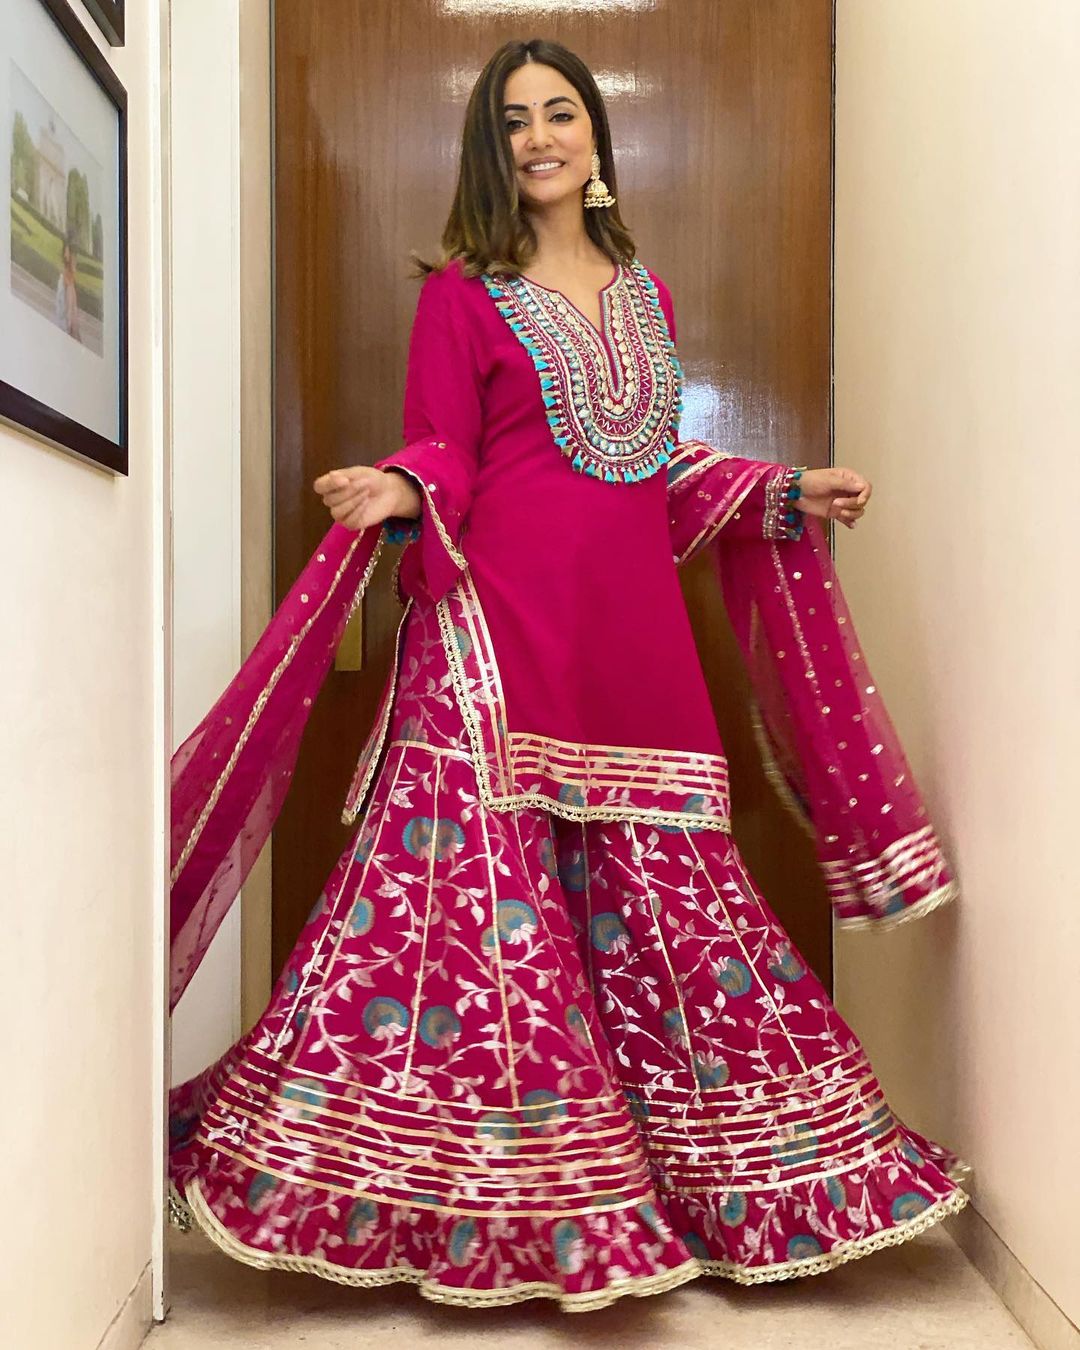 Hina Khan's Pink Modern Floral Sharara Suit Is An Ethnic Inspiration For Every Girl 2